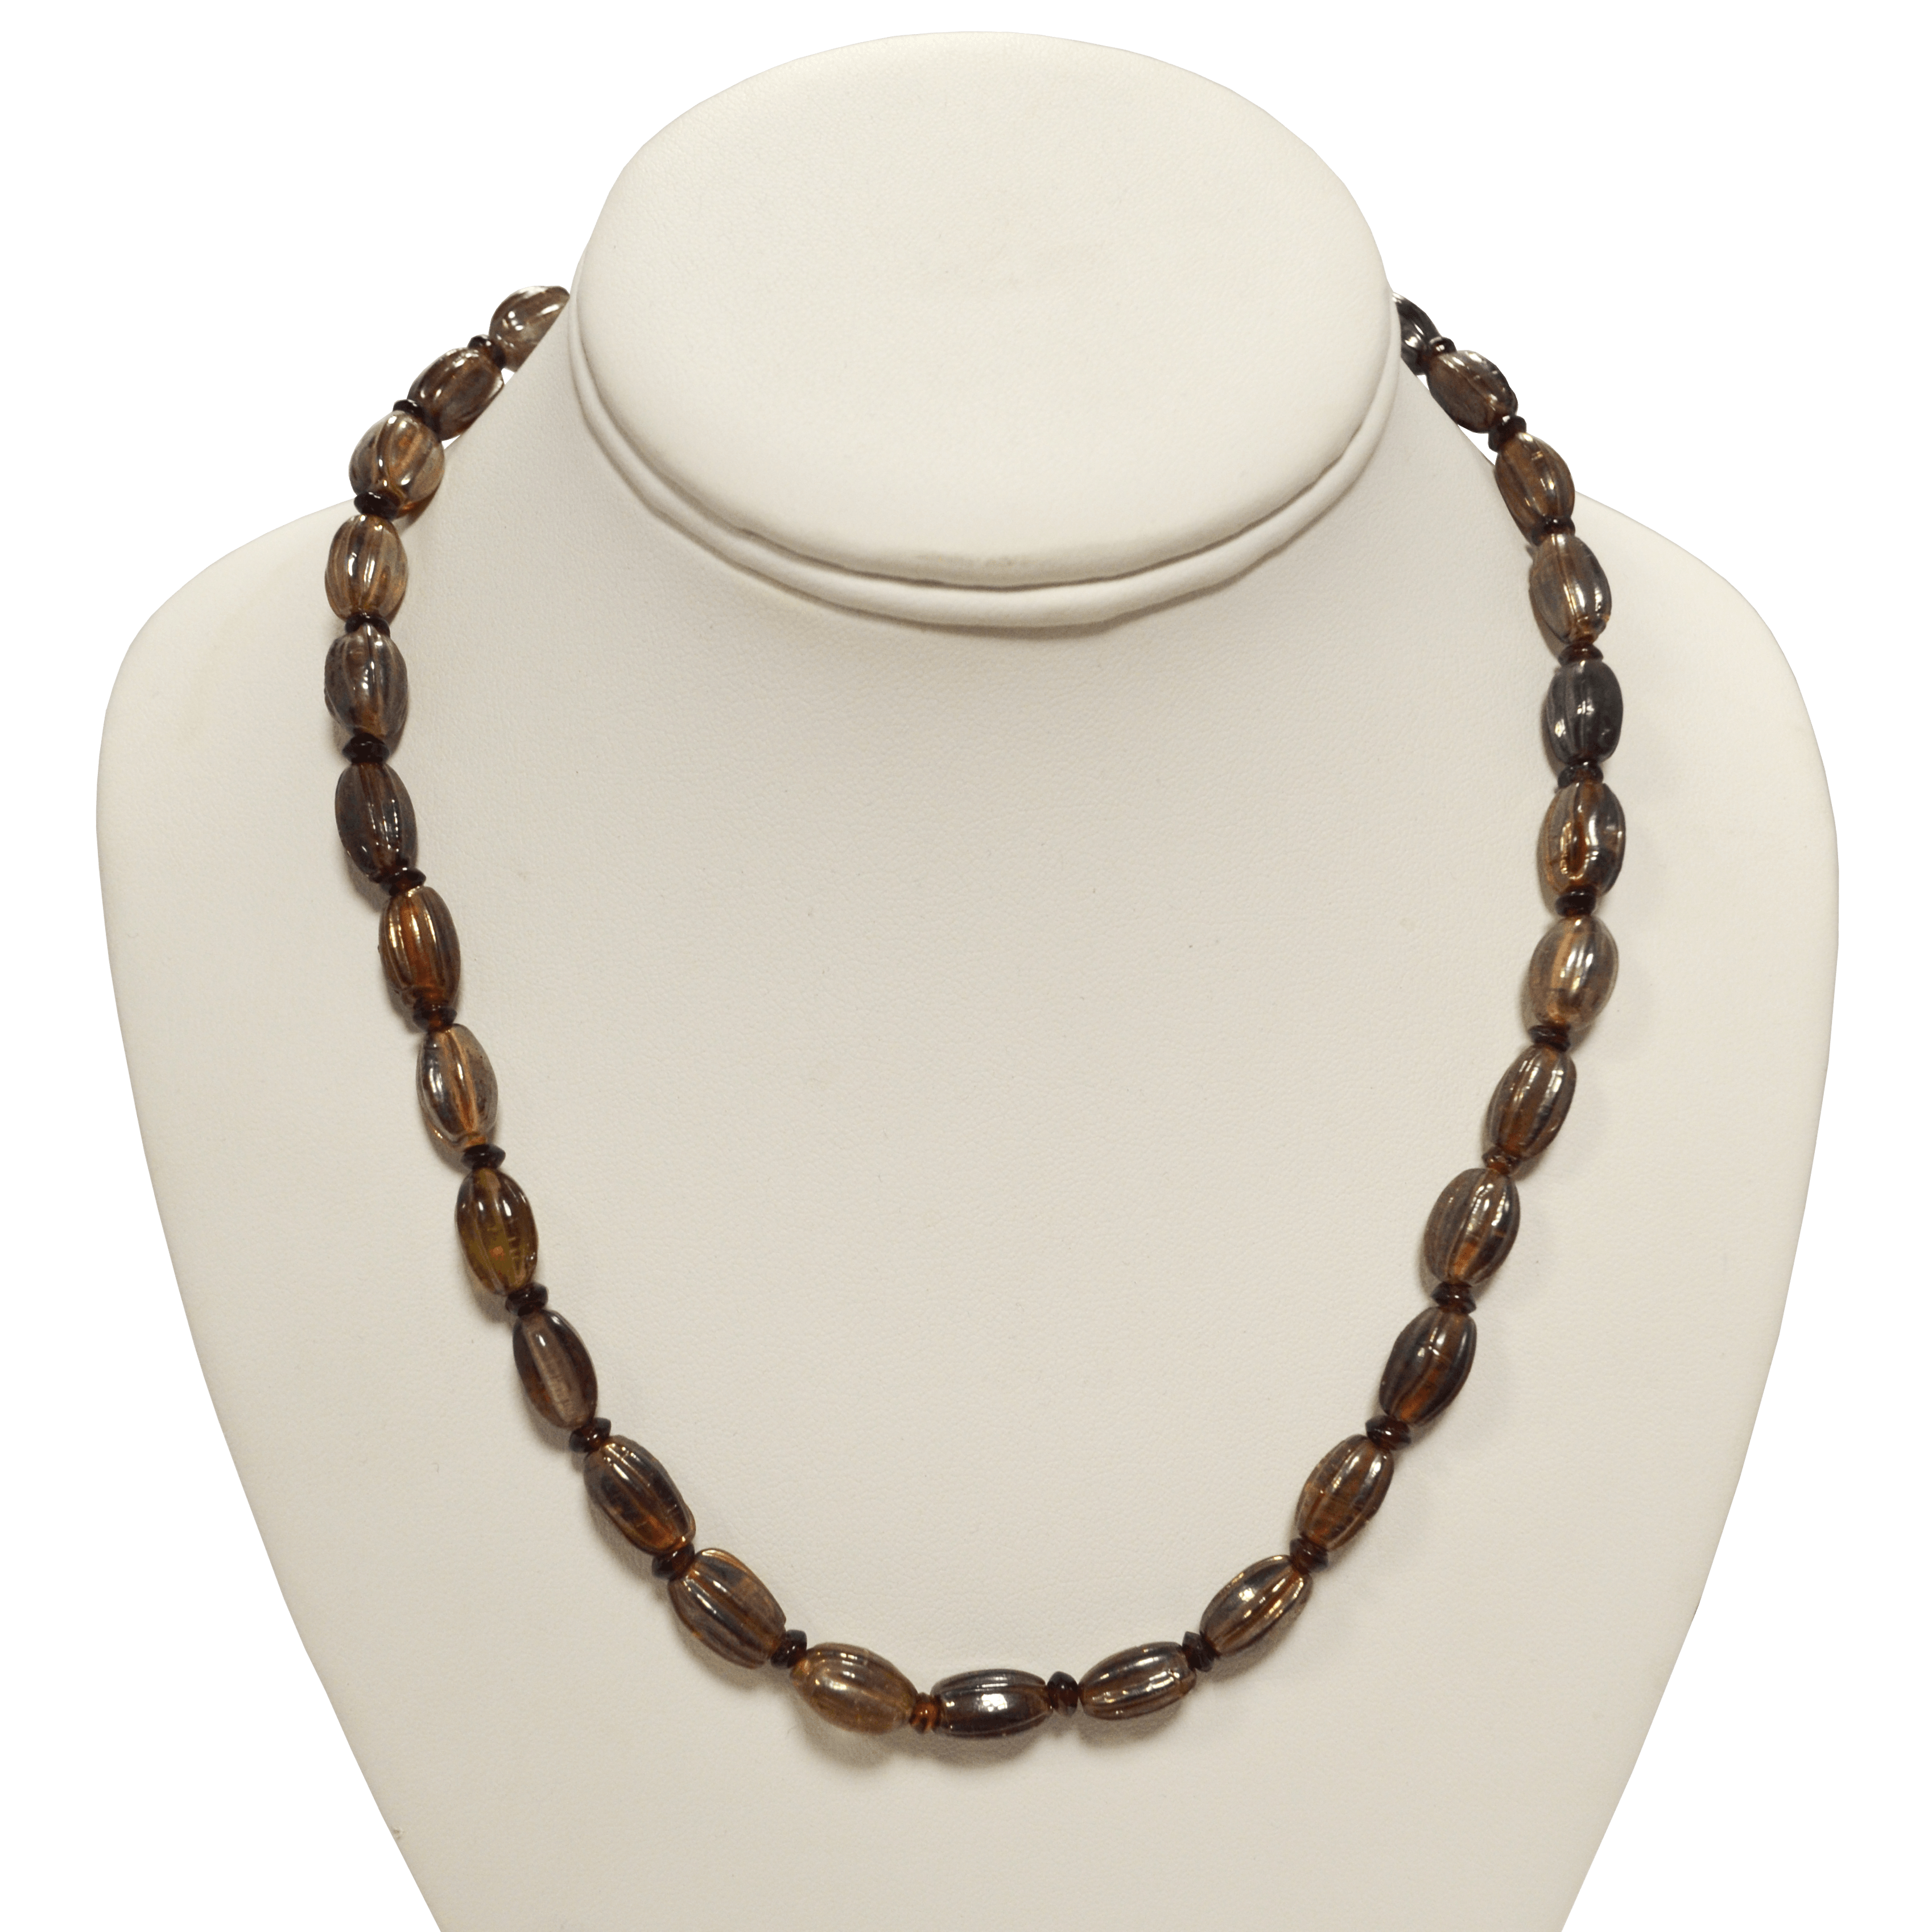 Subtle metallic sheen necklace by Judy Phillips